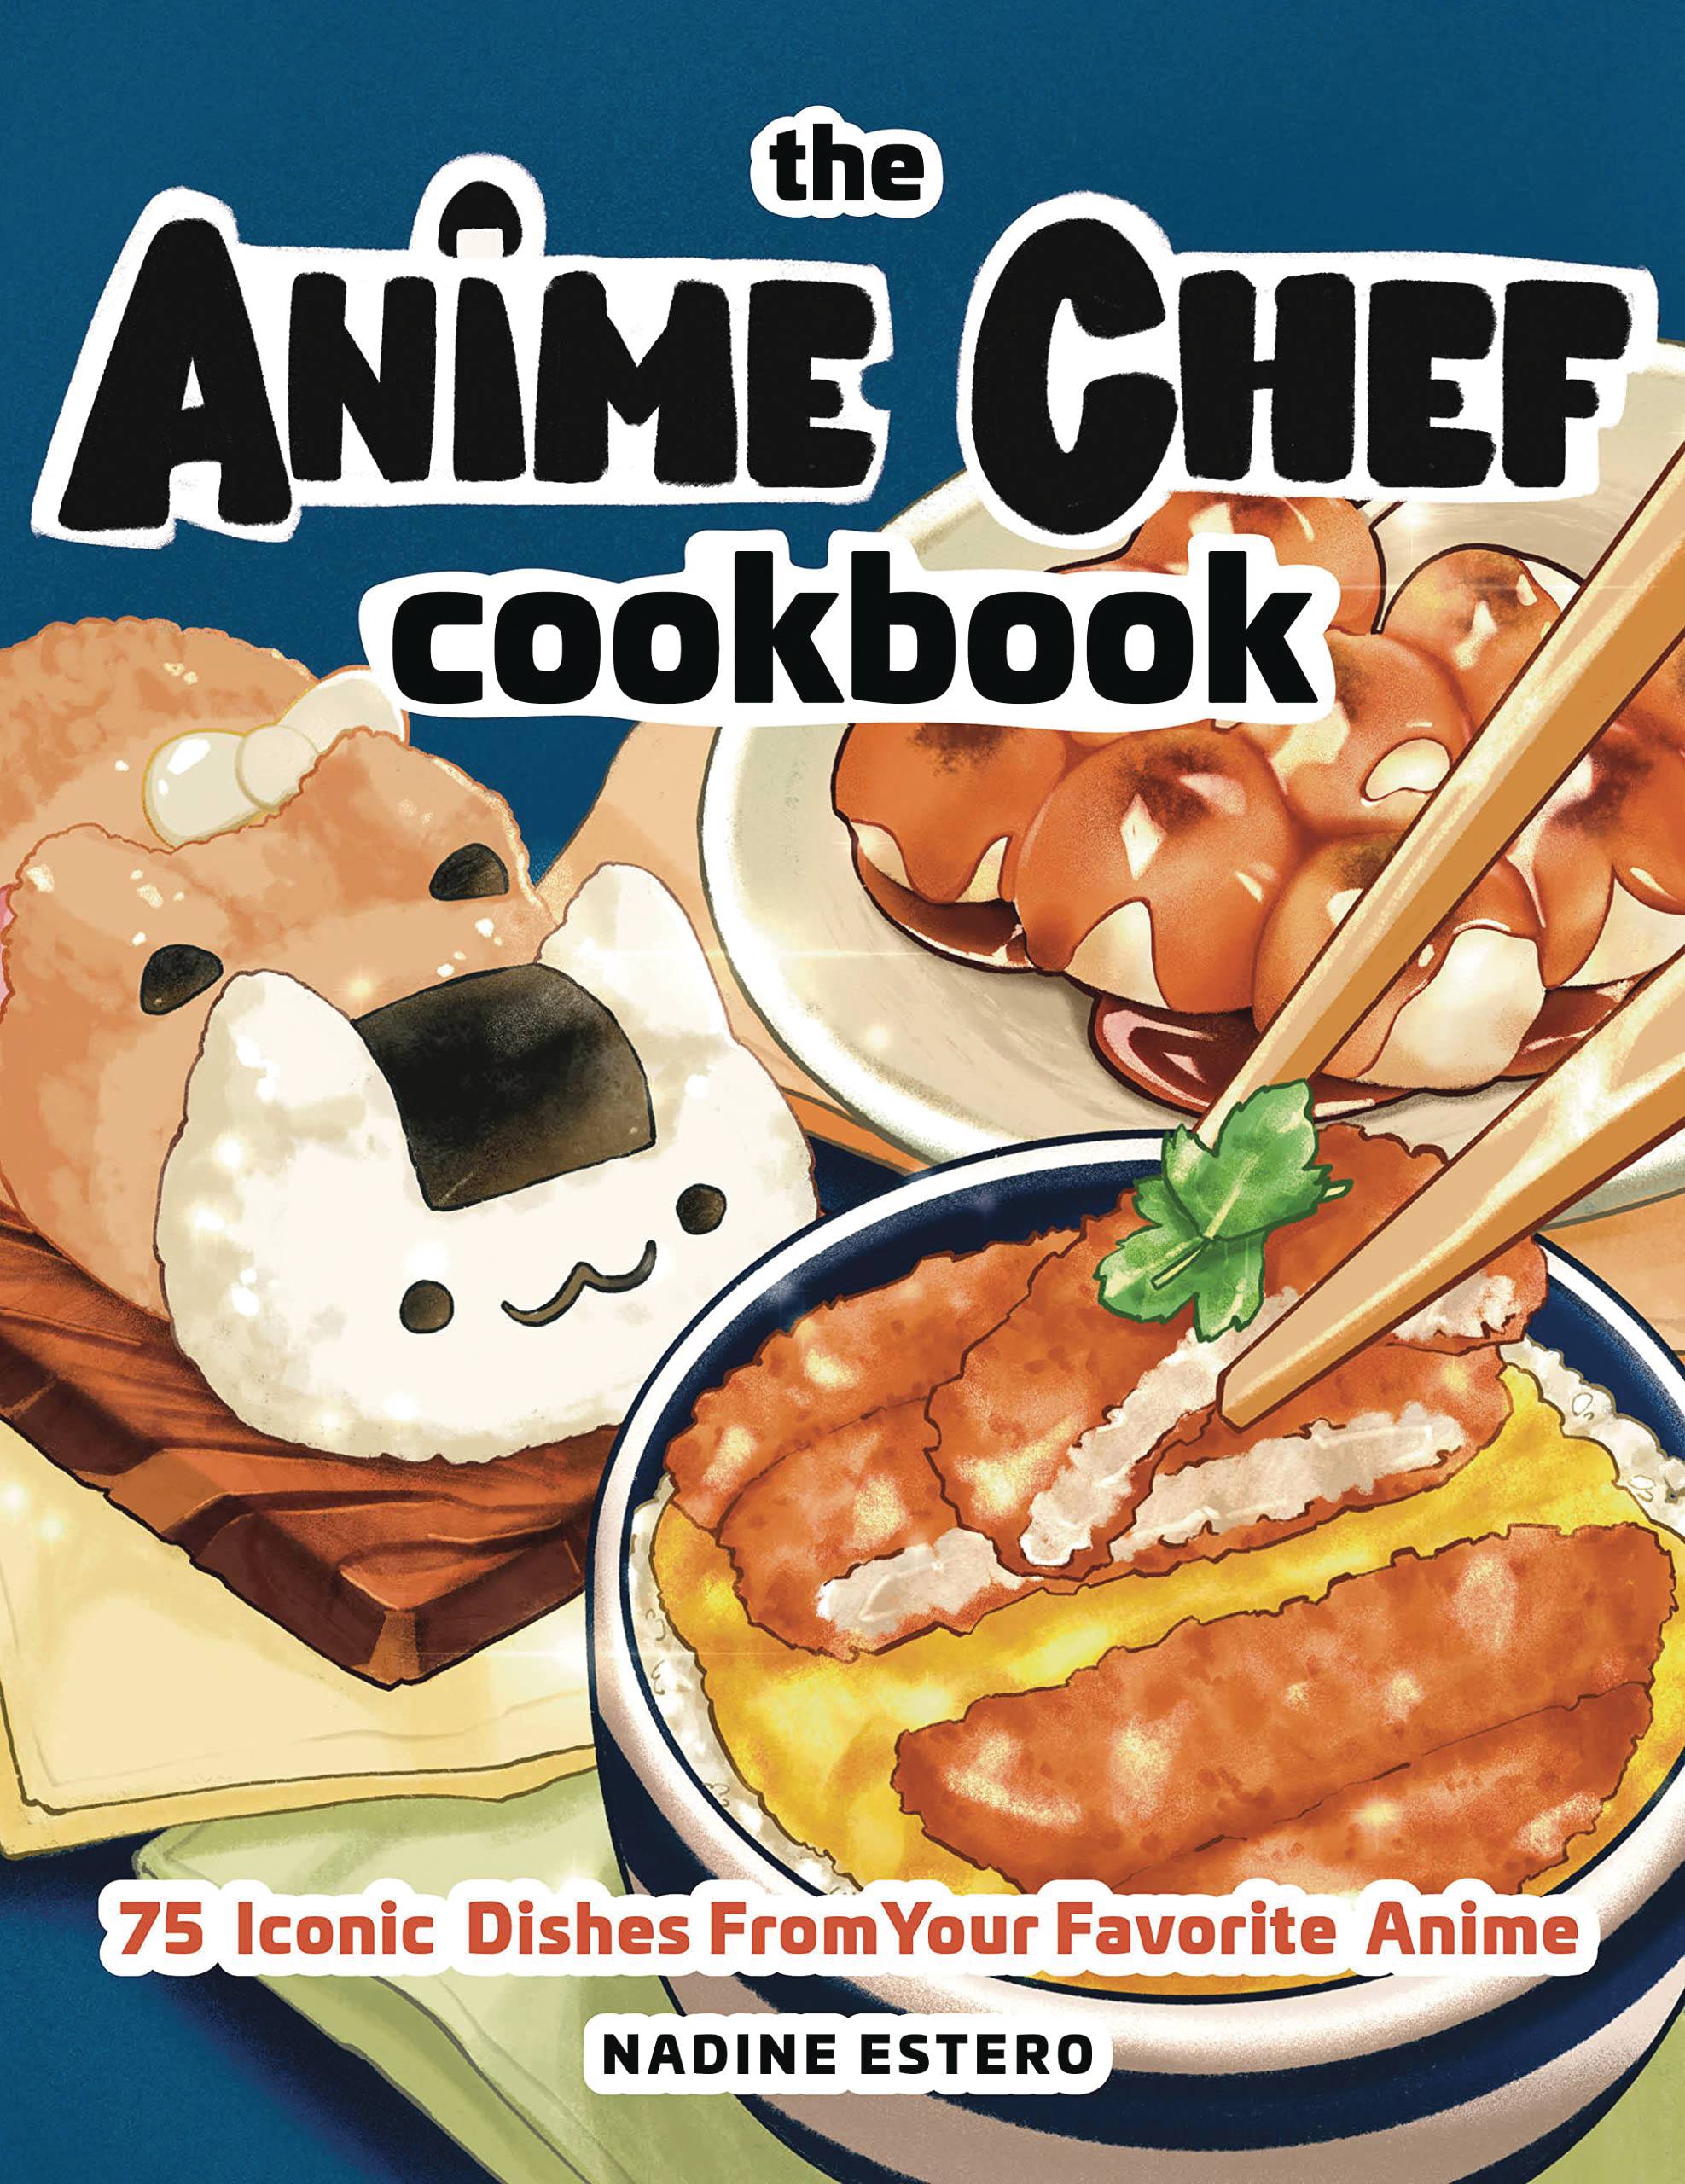 ANIME CHEF COOKBOOK 75 ICONIC DISHES FAVORITE ANIME HC